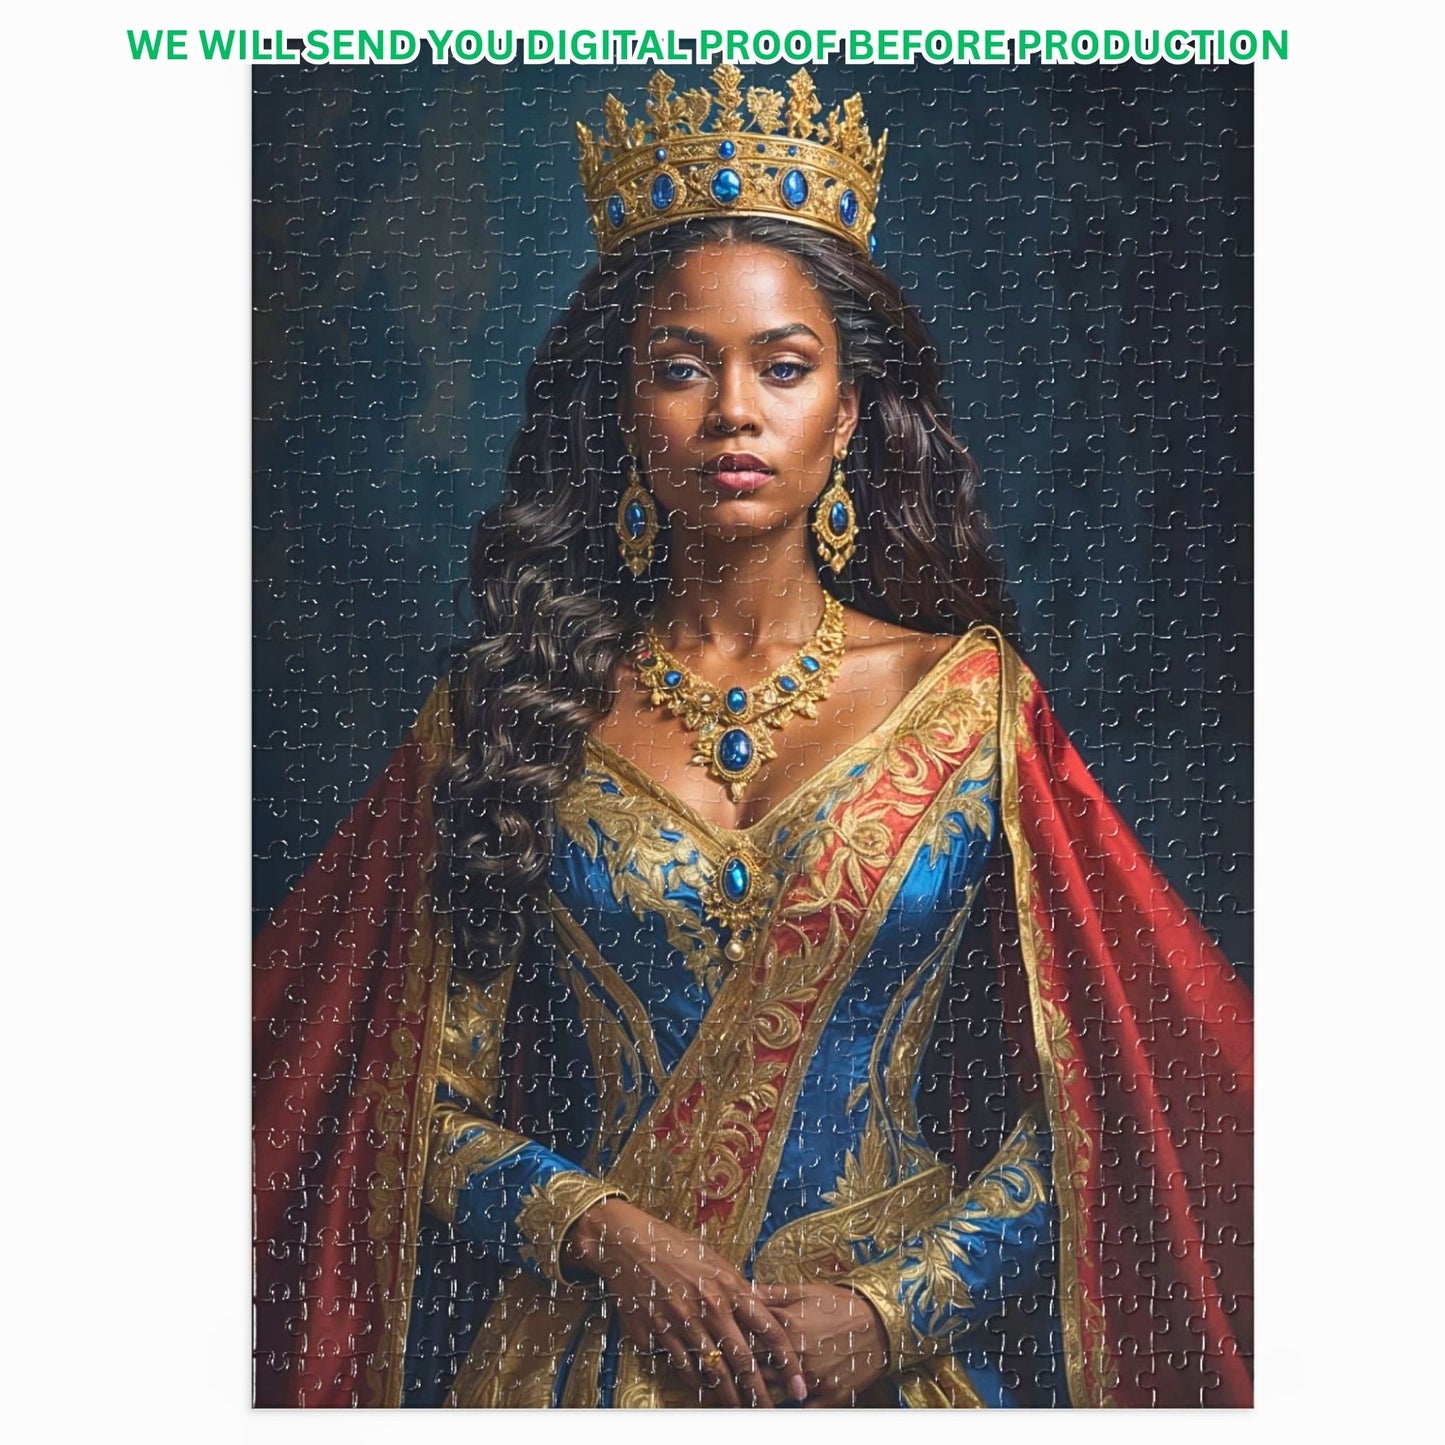 Transform your photos into stunning Custom Royal Puzzle portraits! Perfect for birthdays, gifts for her, and home decor. Explore Renaissance puzzles, personalized queen portraits, and historical puzzle art. AI-designed, digital downloads available. Surprise with custom female puzzle gifts that celebrate uniqueness and history.